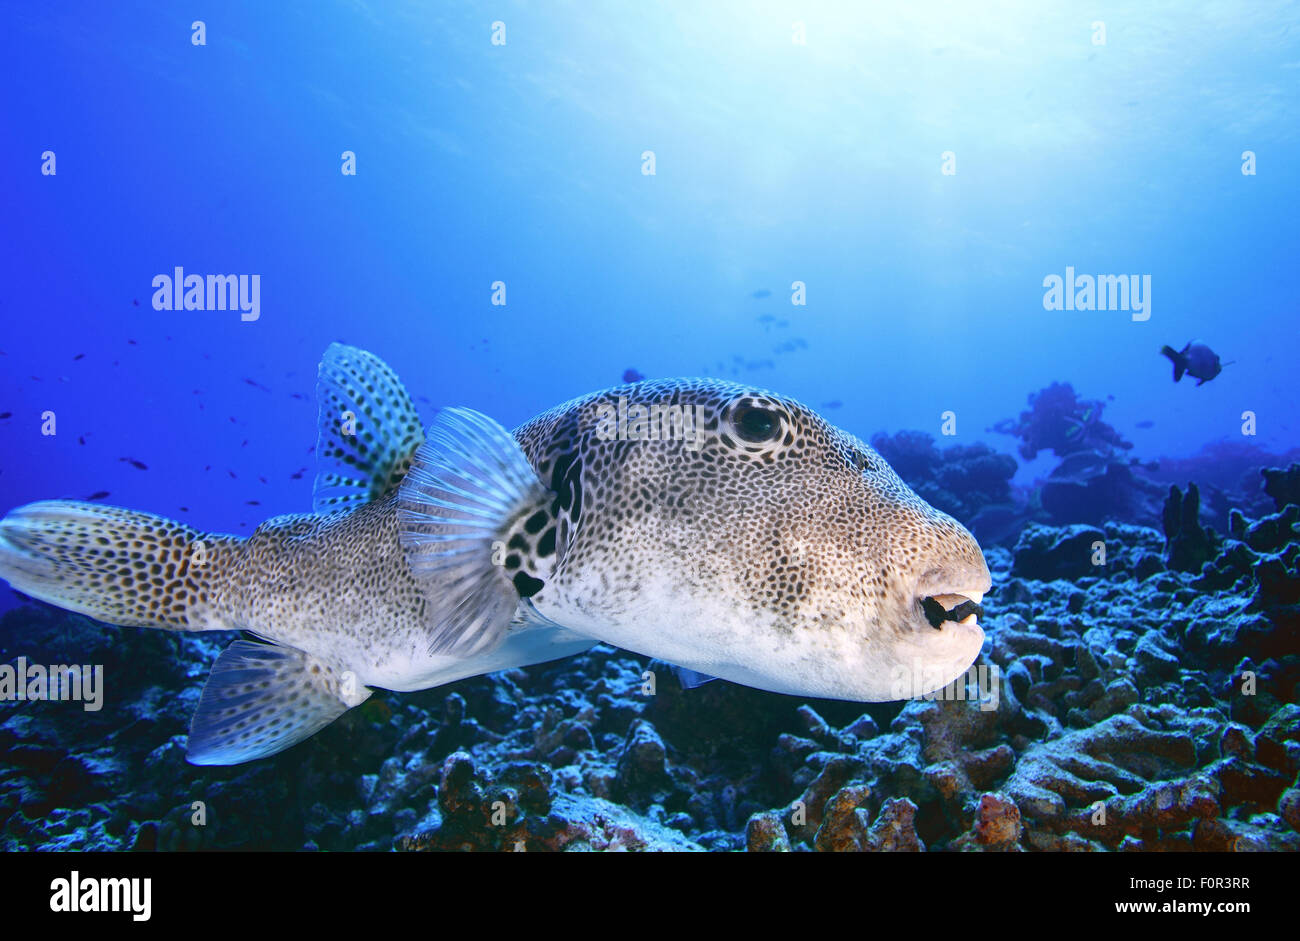 BIG PUFFER FISH SWIMMING ON CORAL REEF IN CLEAR BLUE WATER Stock Photo